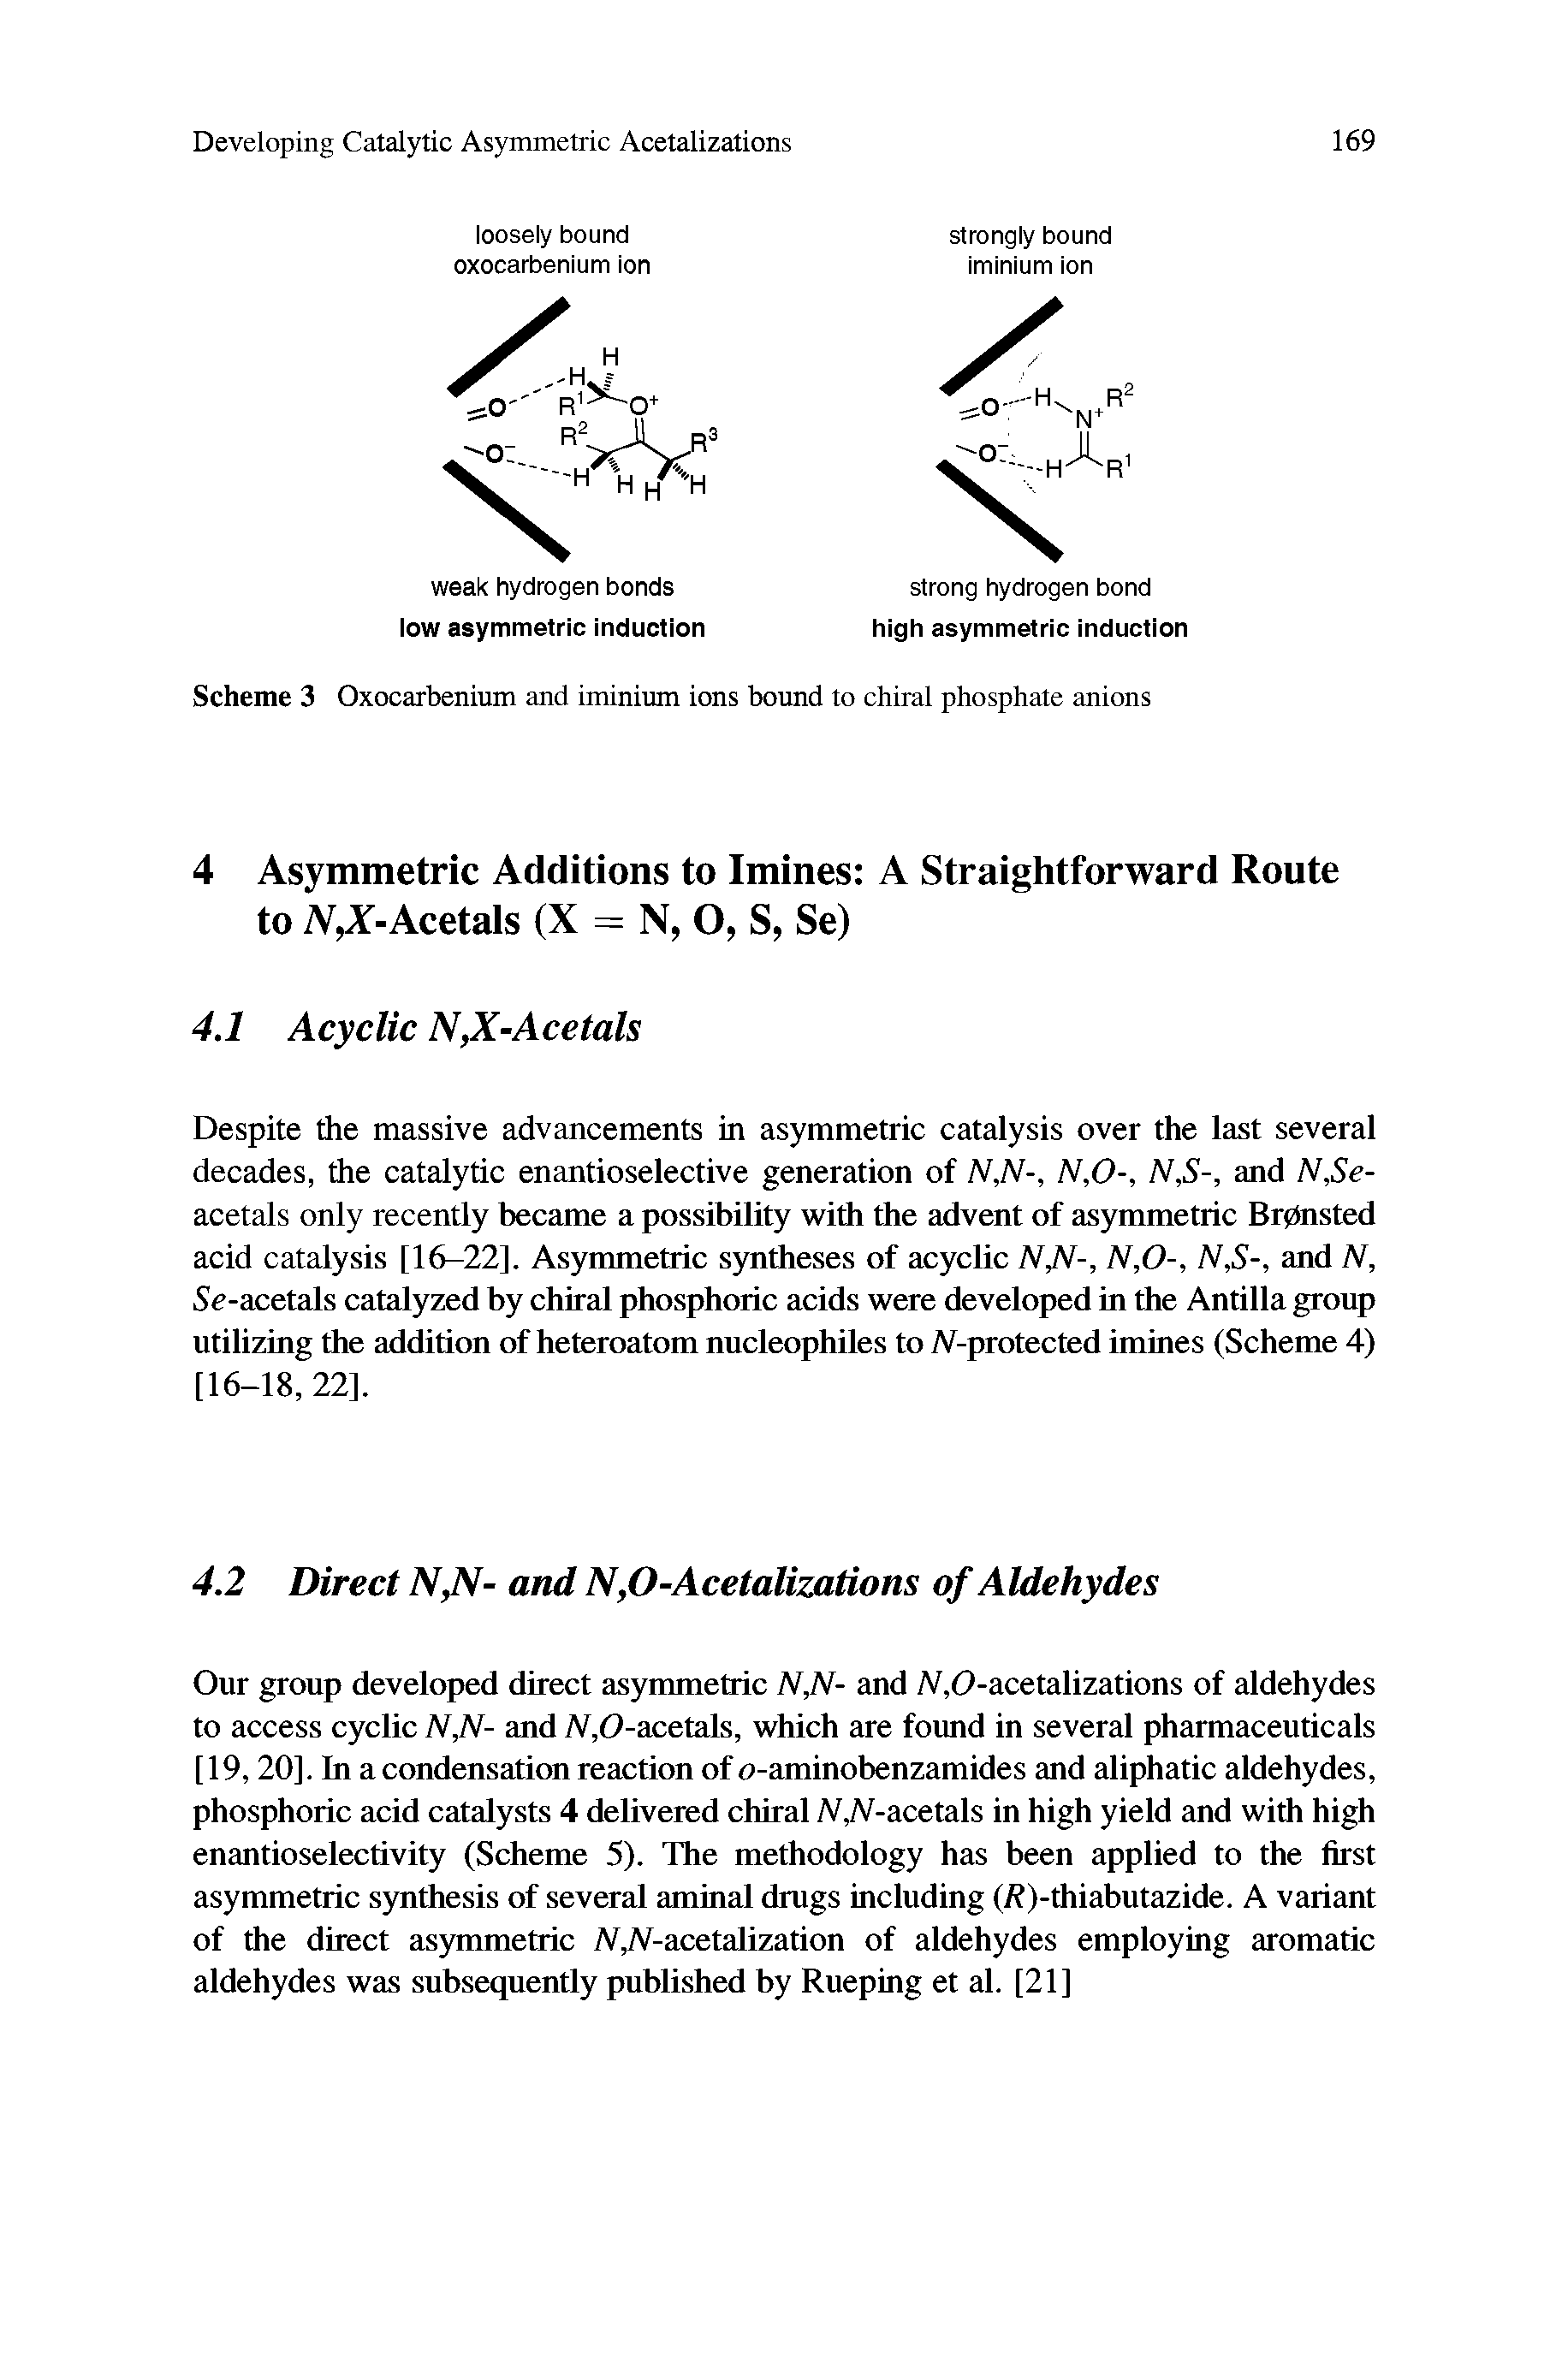 Scheme 3 Oxocarbenium and iminium ions bound to chiral phosphate anions...